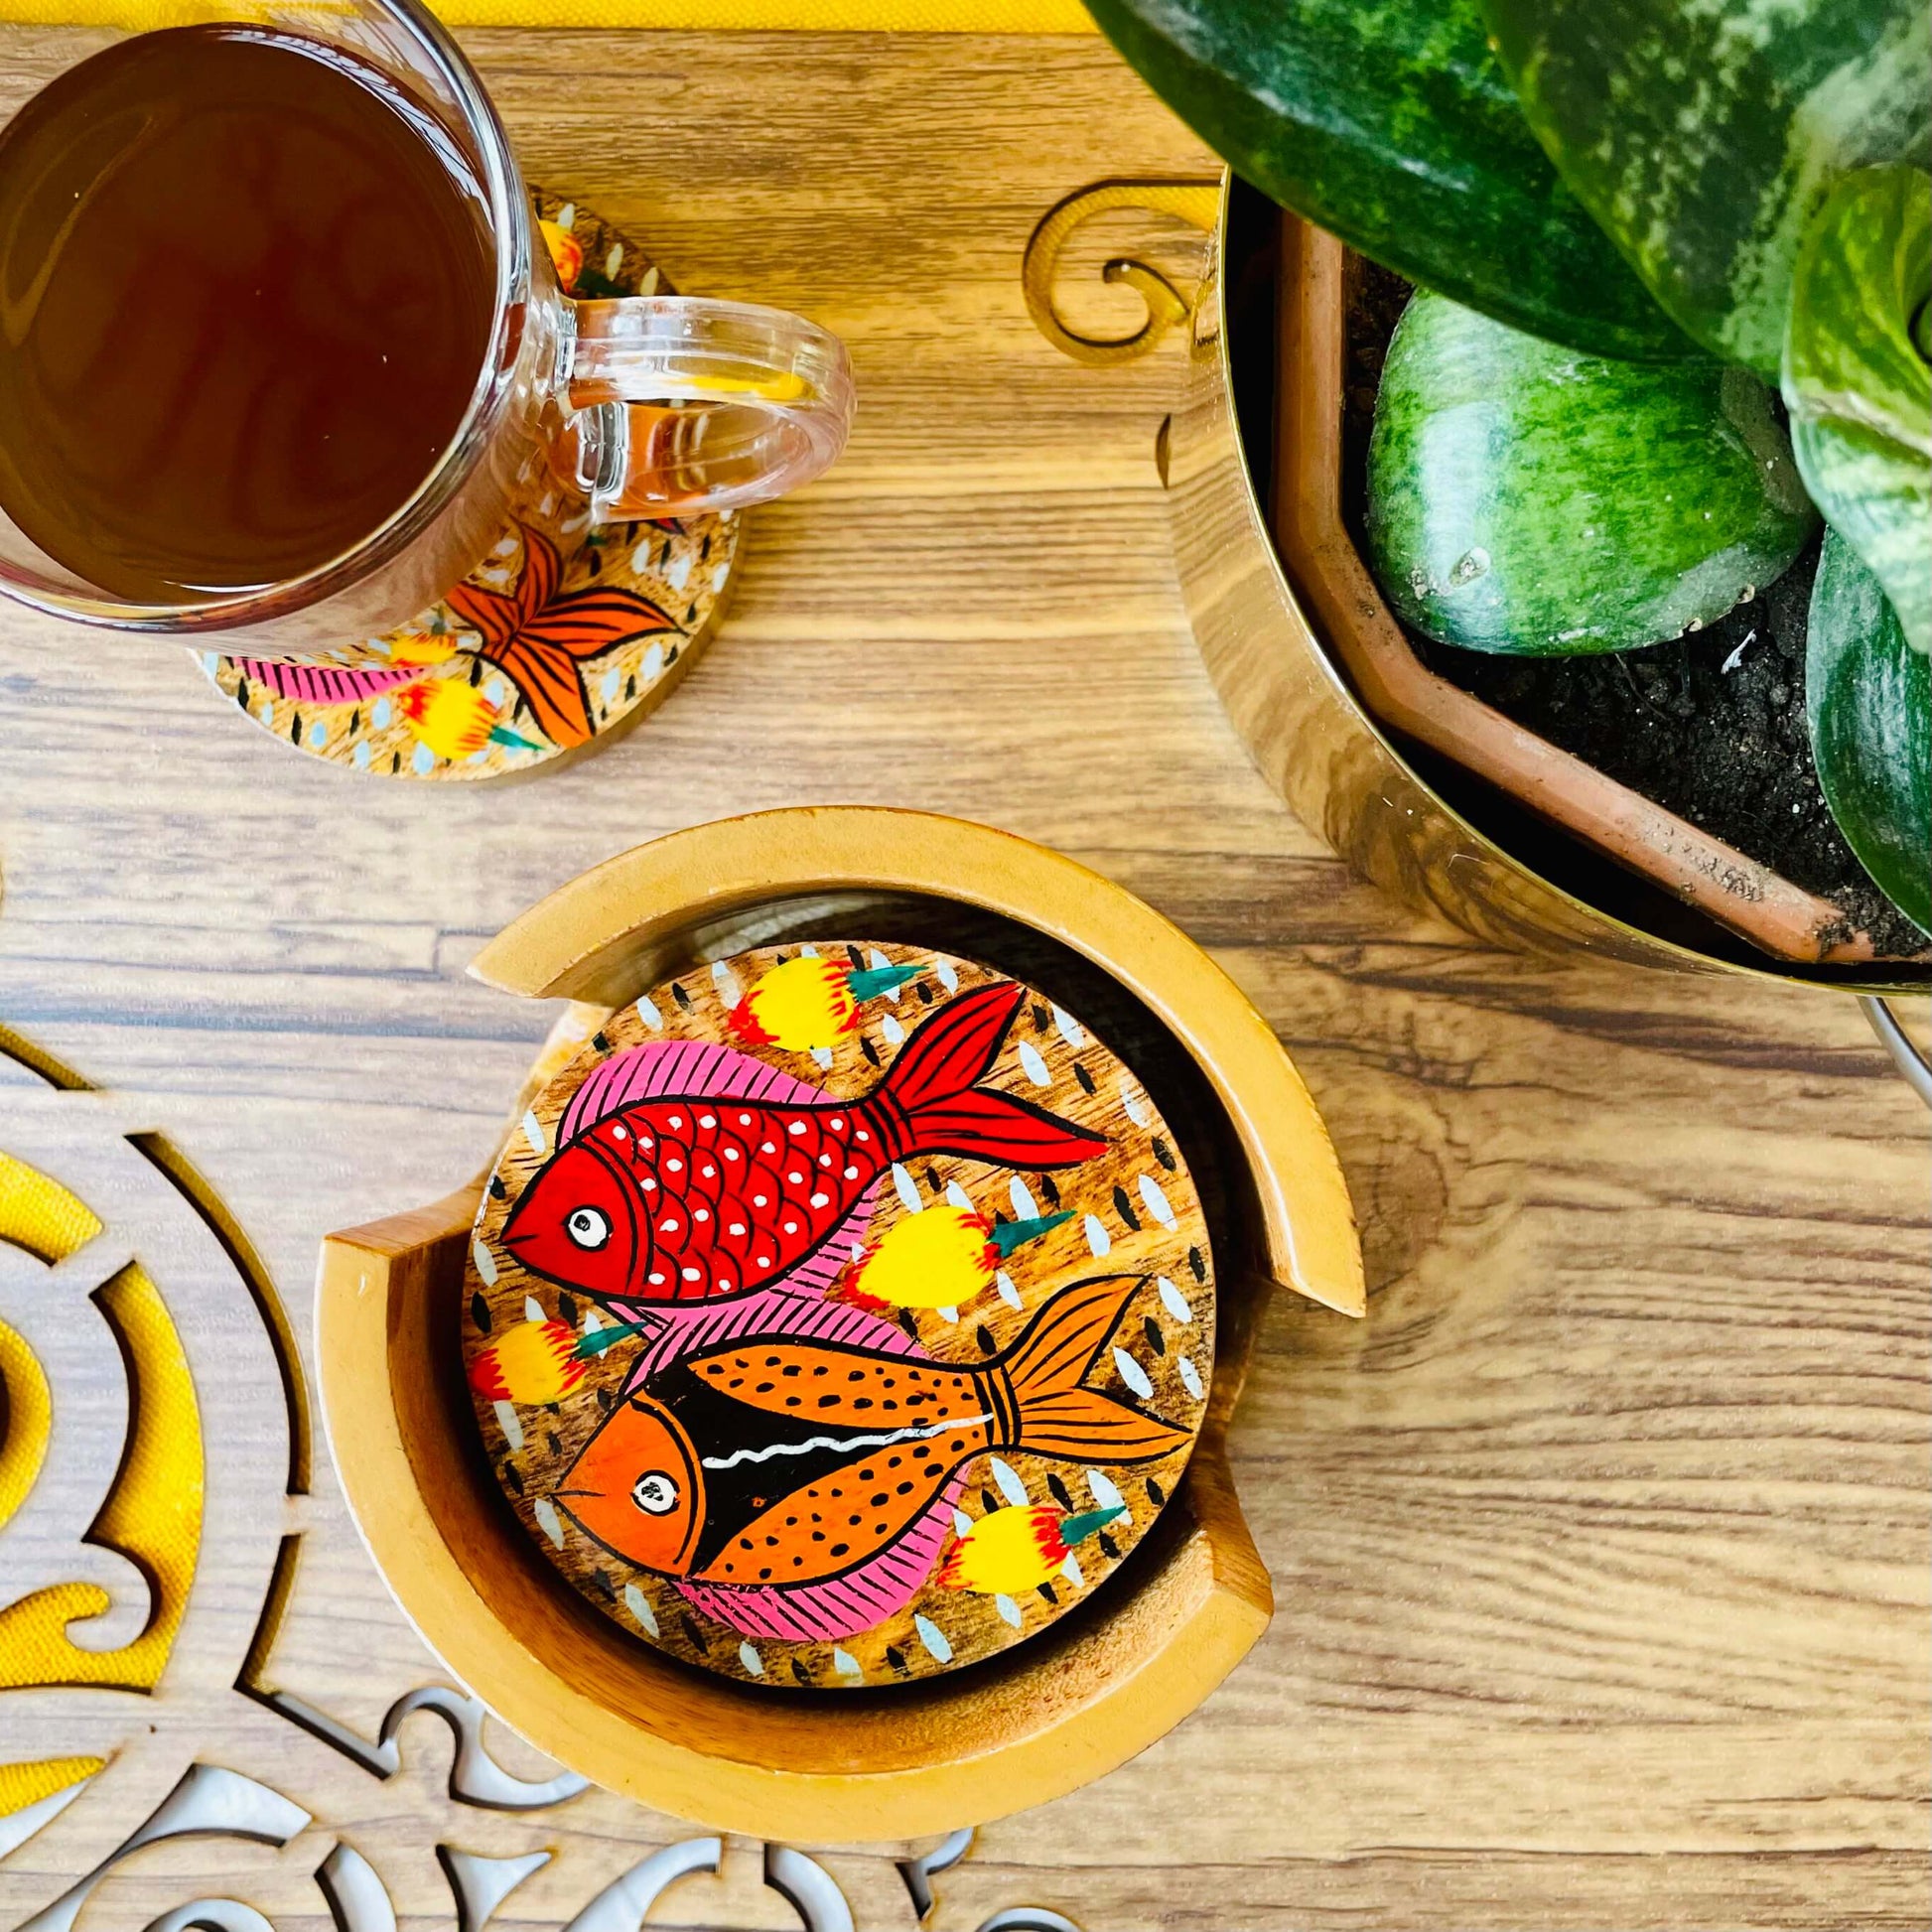 red and orange fishes having pink and yellow fins print round wood coasters placed in a round wooden coasters holder near a flower pot and tea cup placed on a round wooden coaster.